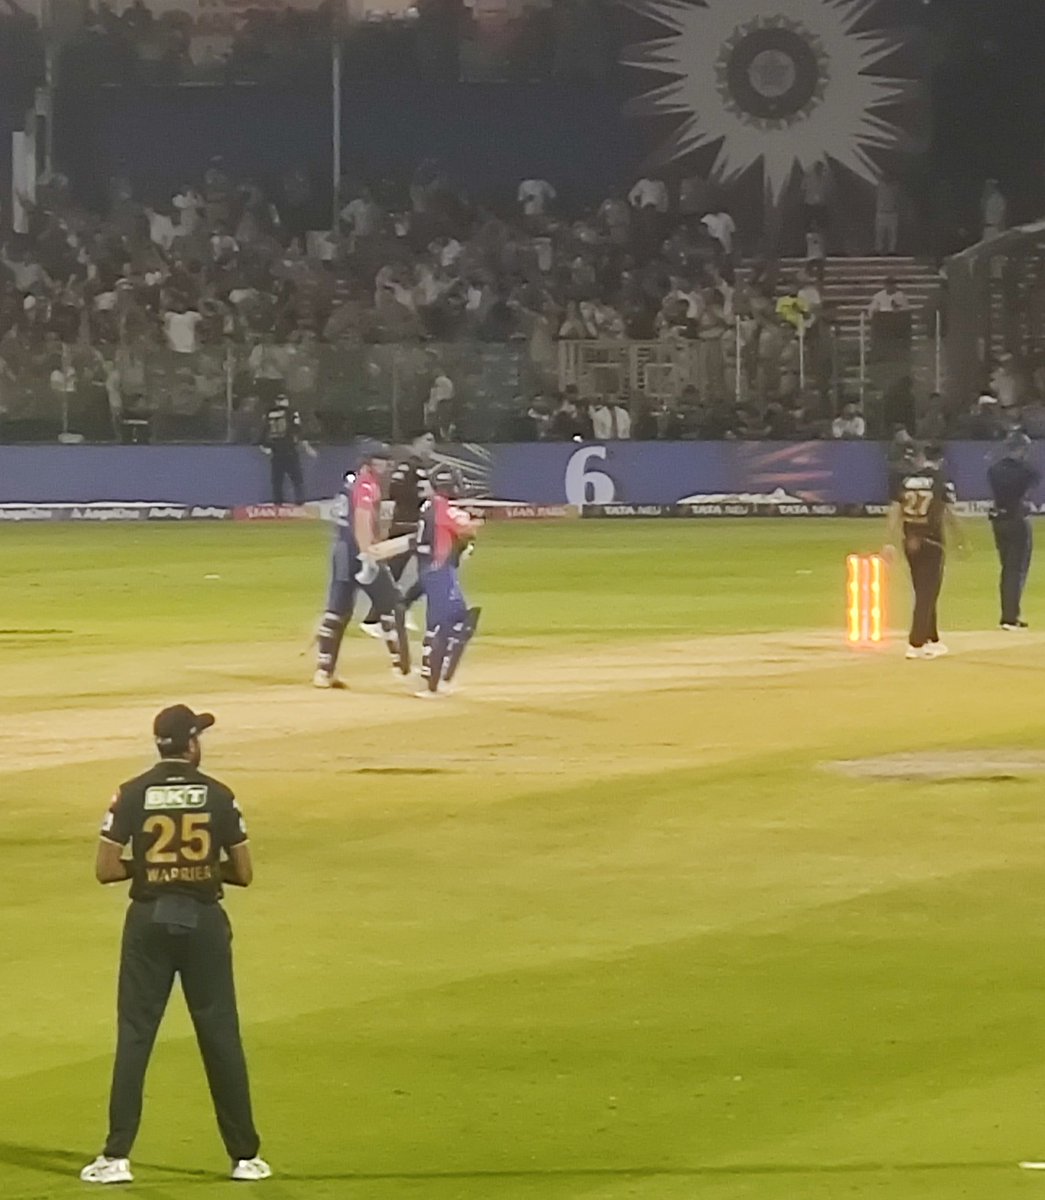 Witnessed Rishabh Pant masterclass. He's well and truly back.  Paisa wasool for the Delhi crowd.